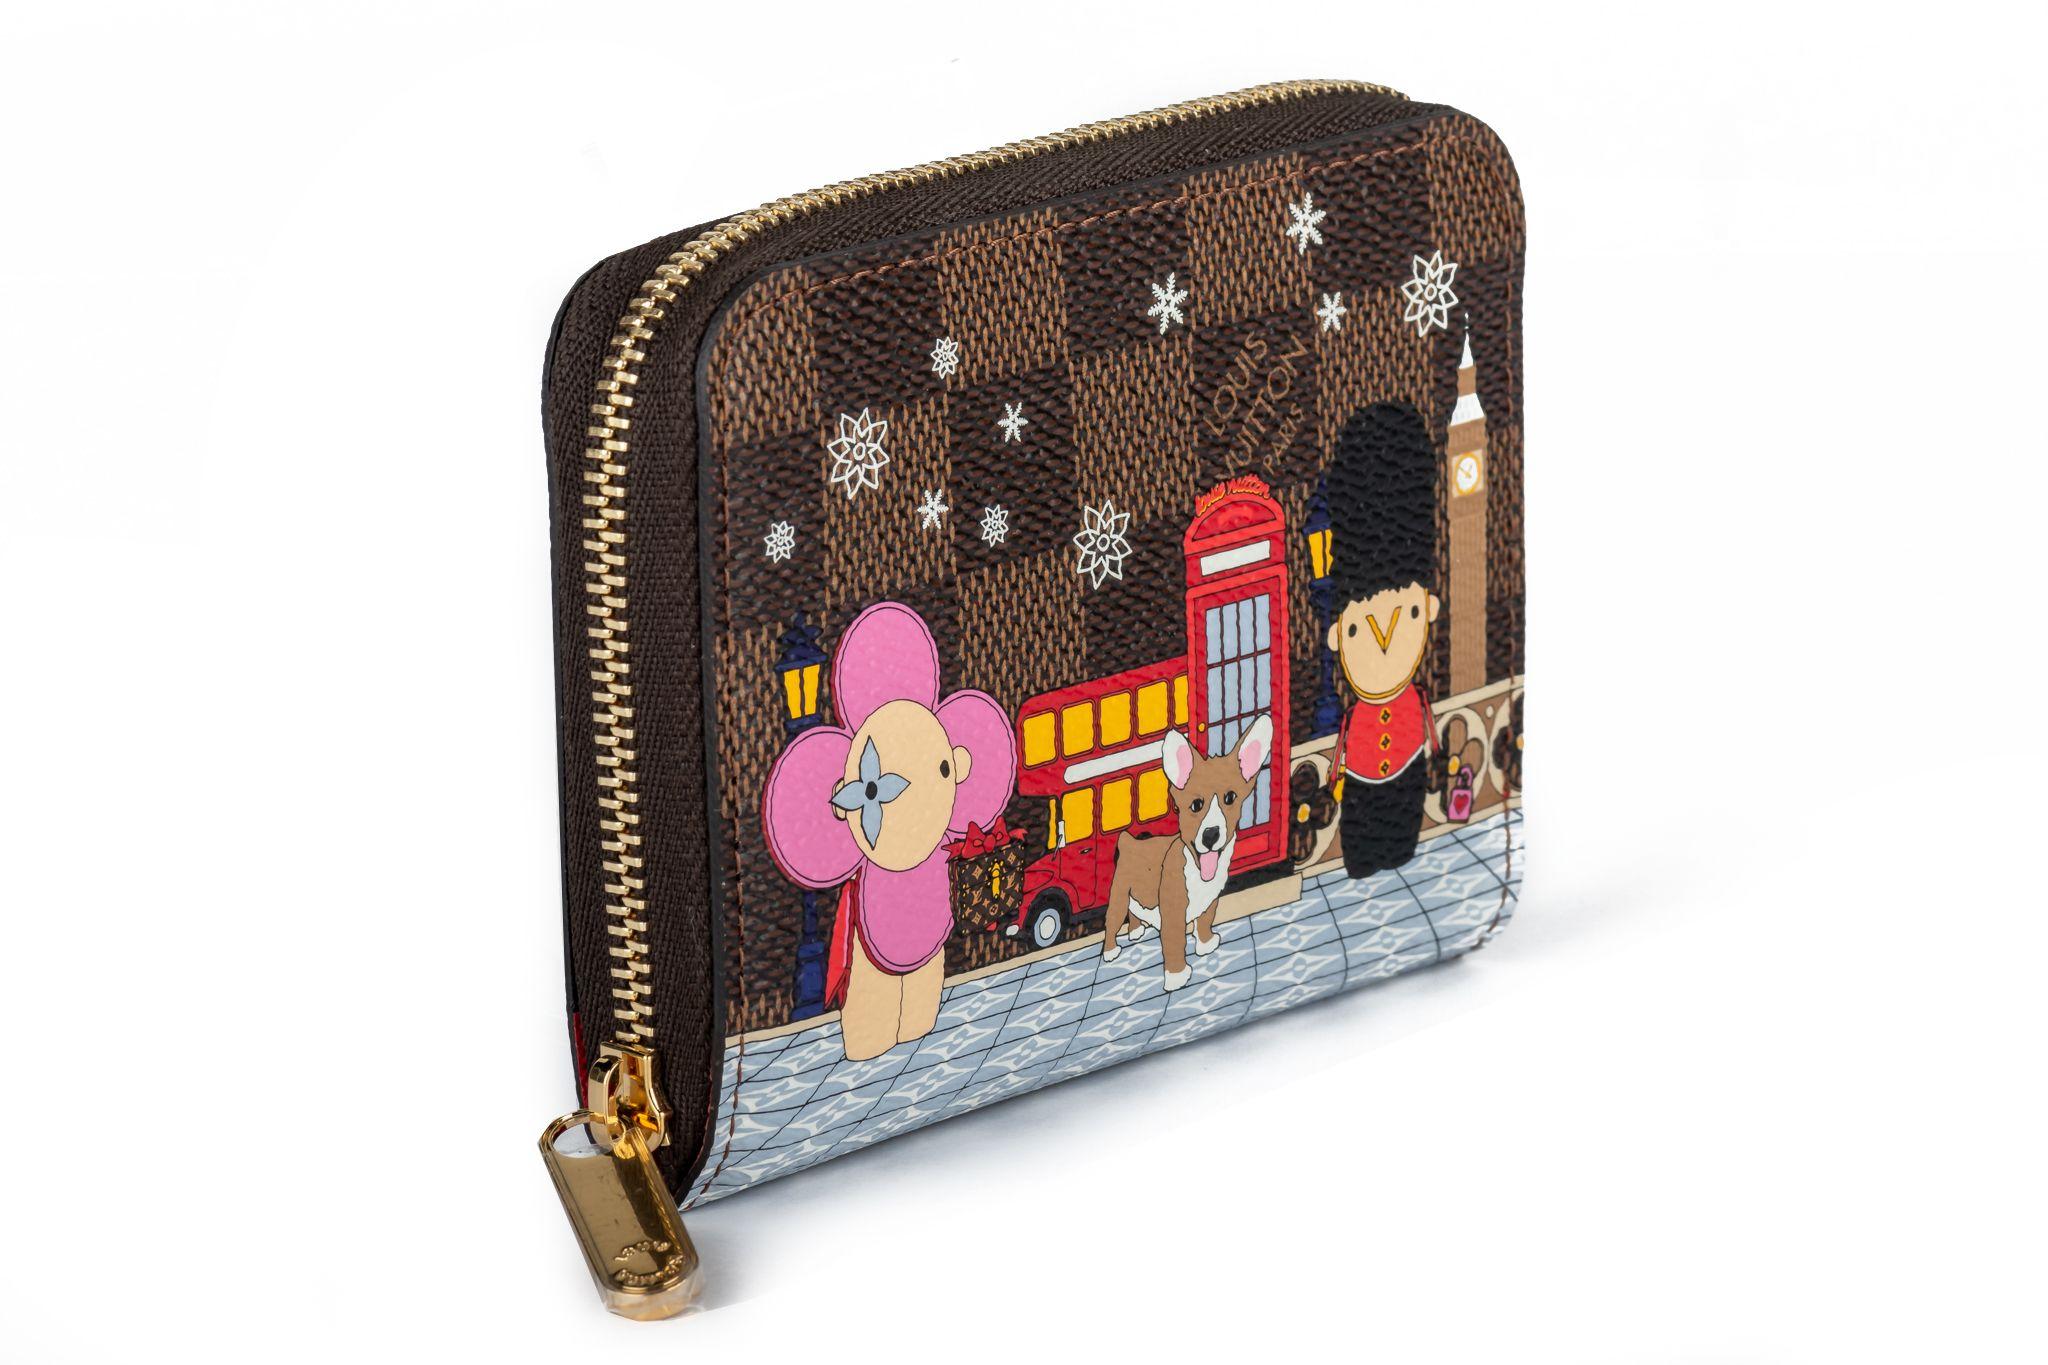 Louis Vuitton’s cute coin purse becomes even more adorable thanks to a print of Vivienne in London Town. Vivienne is the House’s mascot and here she’s seen with a Welsh Guard. Lined in red leather, the purse can securely carry coins, cards, and